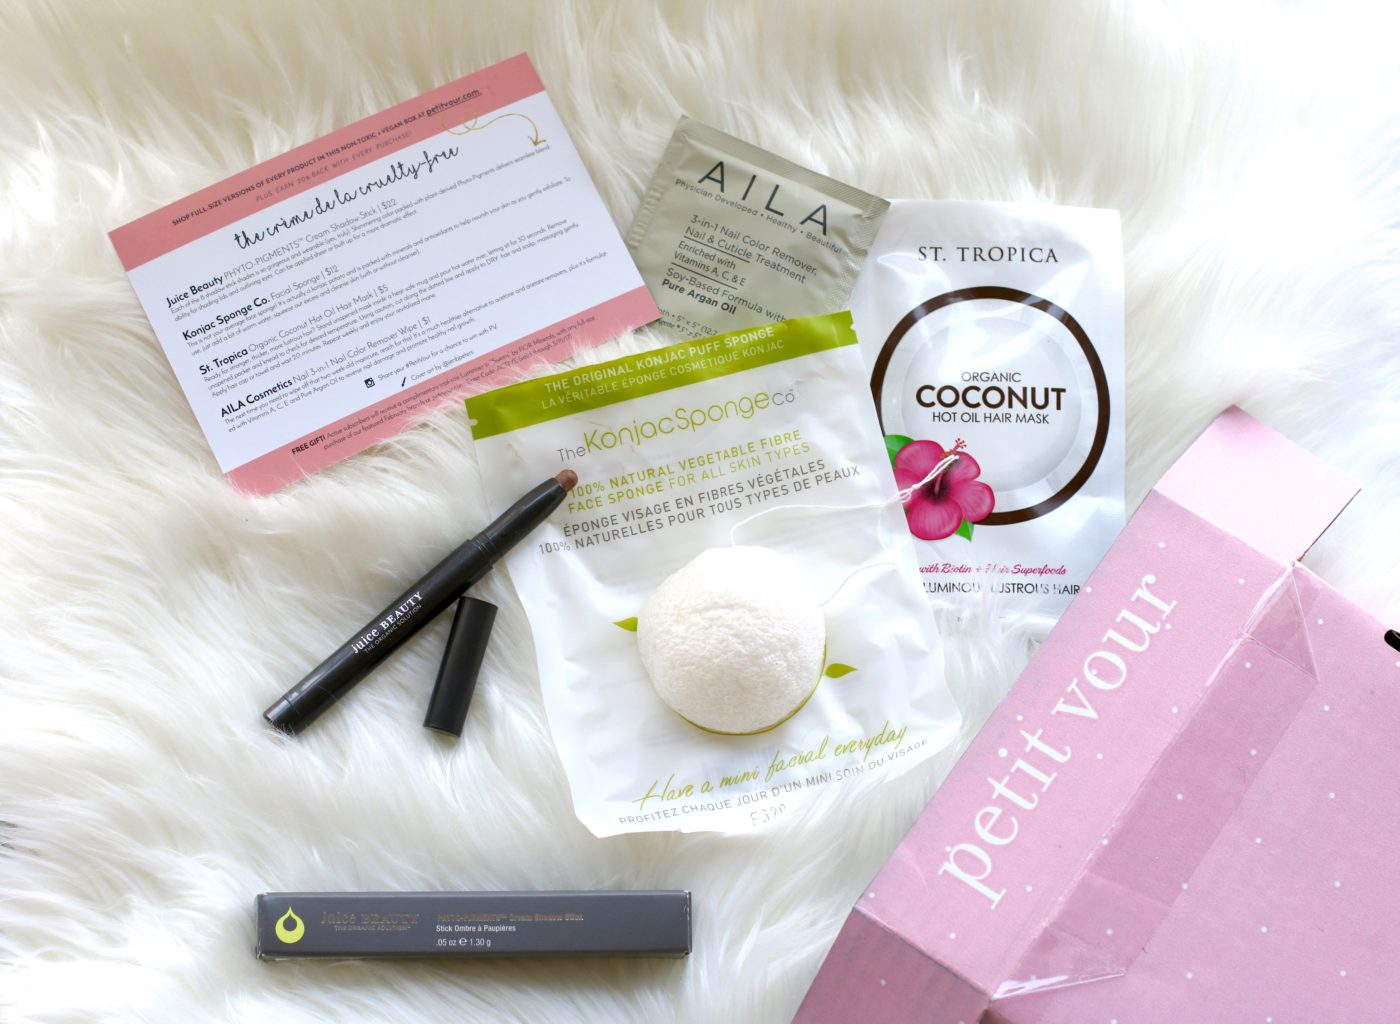 We're loving the Petit Vour Subscription Box, a monthly beauty box filled with luxe vegan beauty: skincare, makeup, and more.